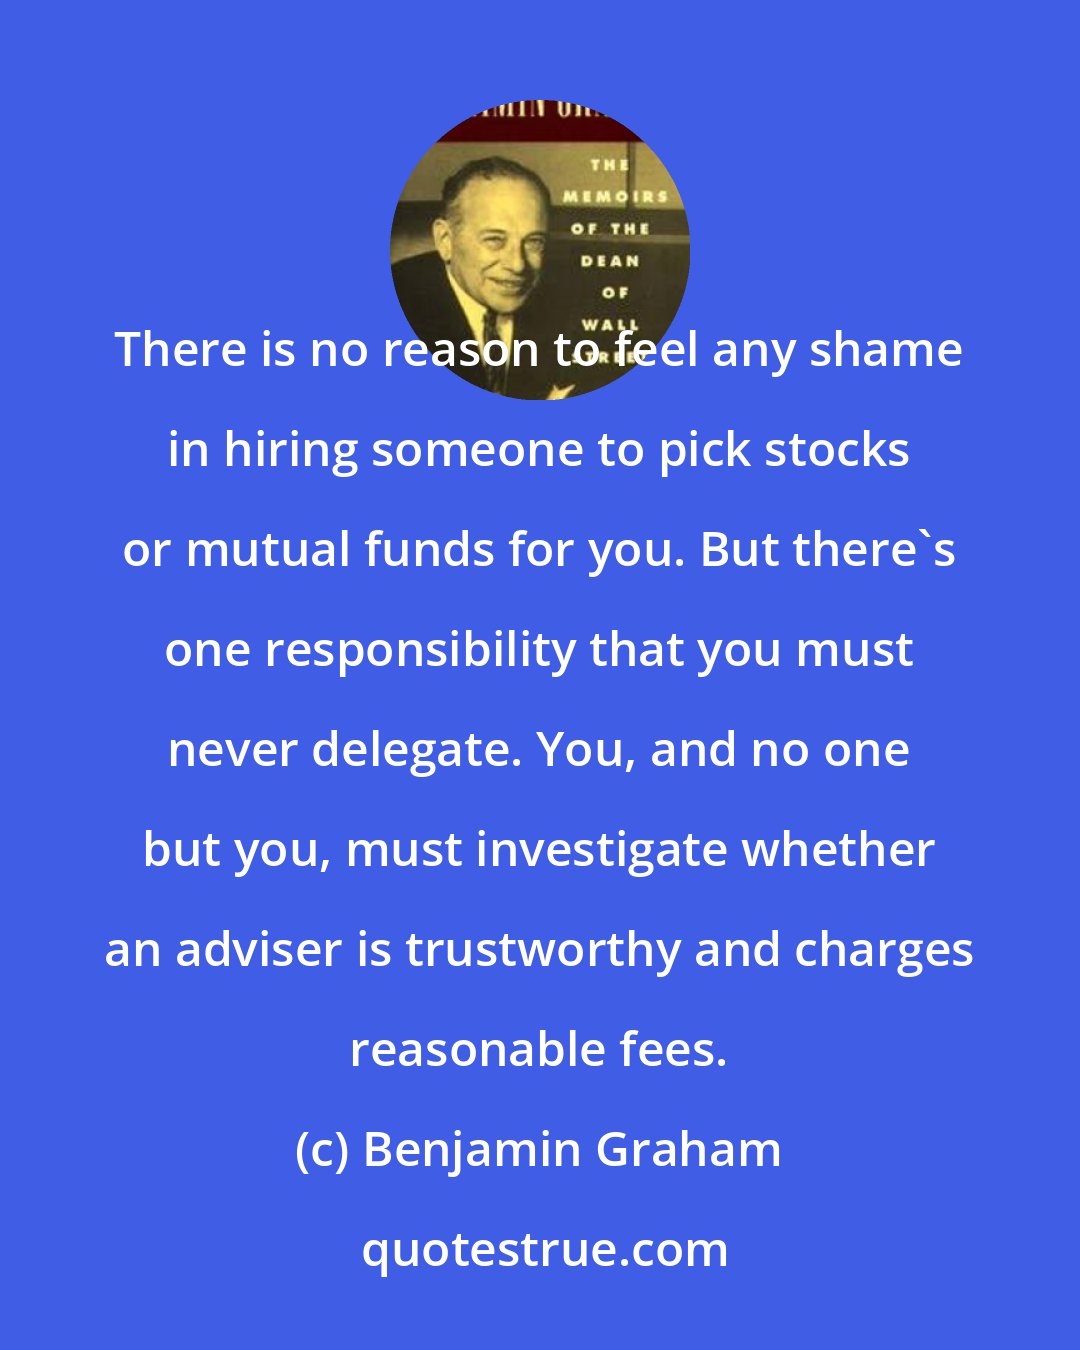 Benjamin Graham: There is no reason to feel any shame in hiring someone to pick stocks or mutual funds for you. But there's one responsibility that you must never delegate. You, and no one but you, must investigate whether an adviser is trustworthy and charges reasonable fees.